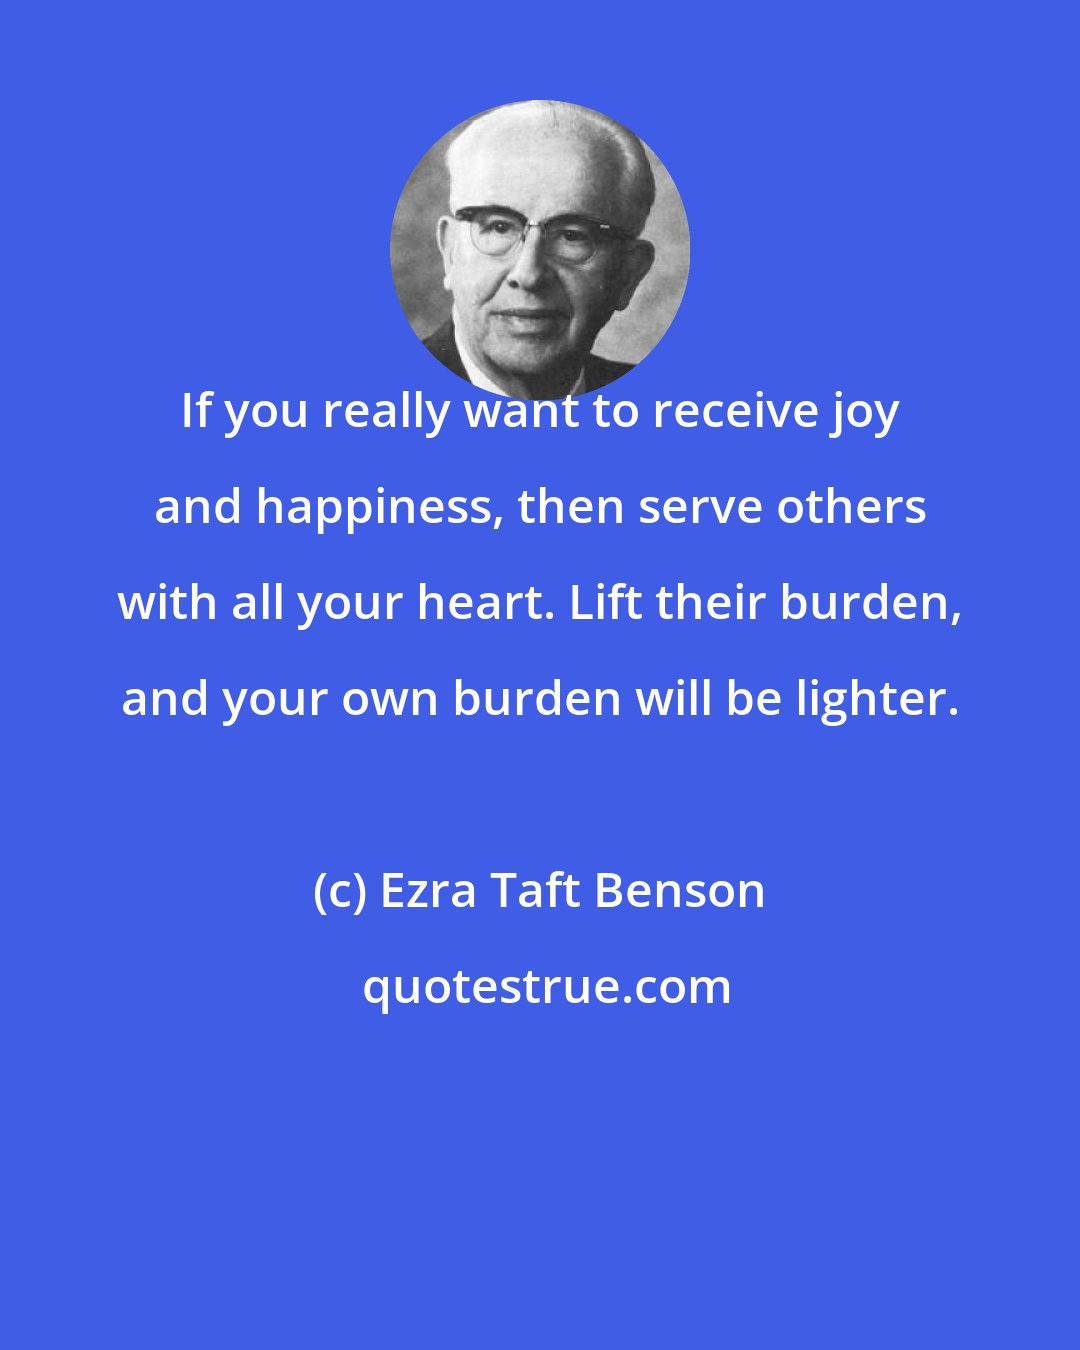 Ezra Taft Benson: If you really want to receive joy and happiness, then serve others with all your heart. Lift their burden, and your own burden will be lighter.